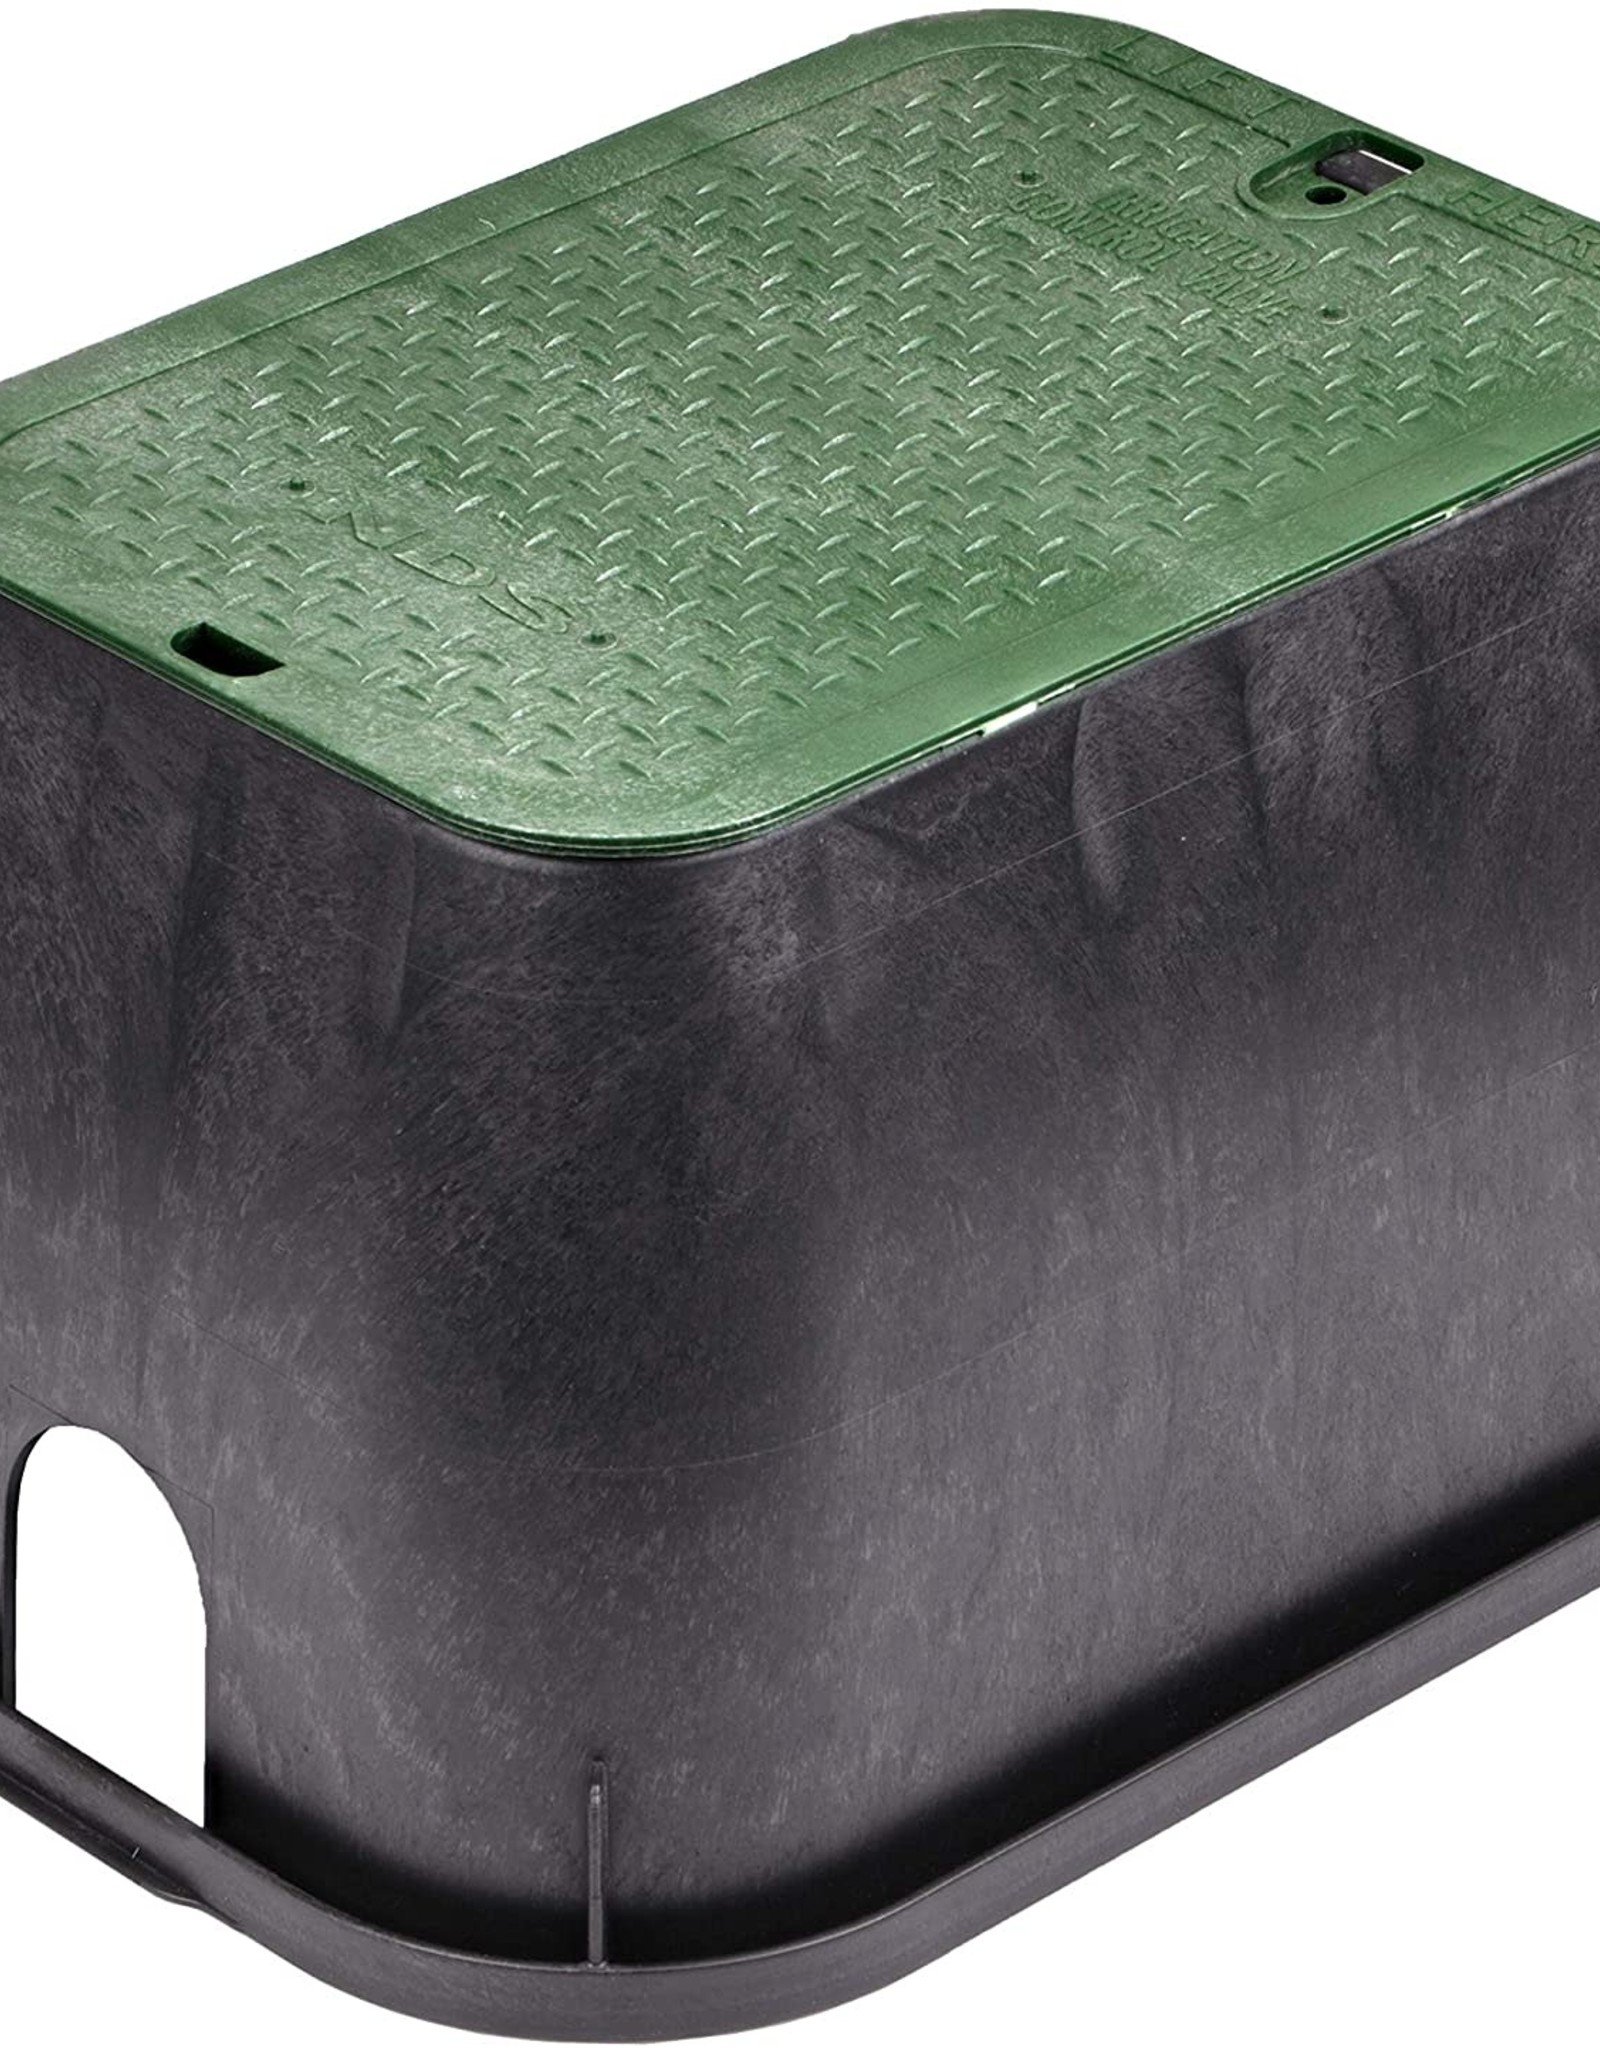 Nds 14" x 19" Standard Series Sprinkler Valve Box- Black with Green Bolt-Down Cover 113BC